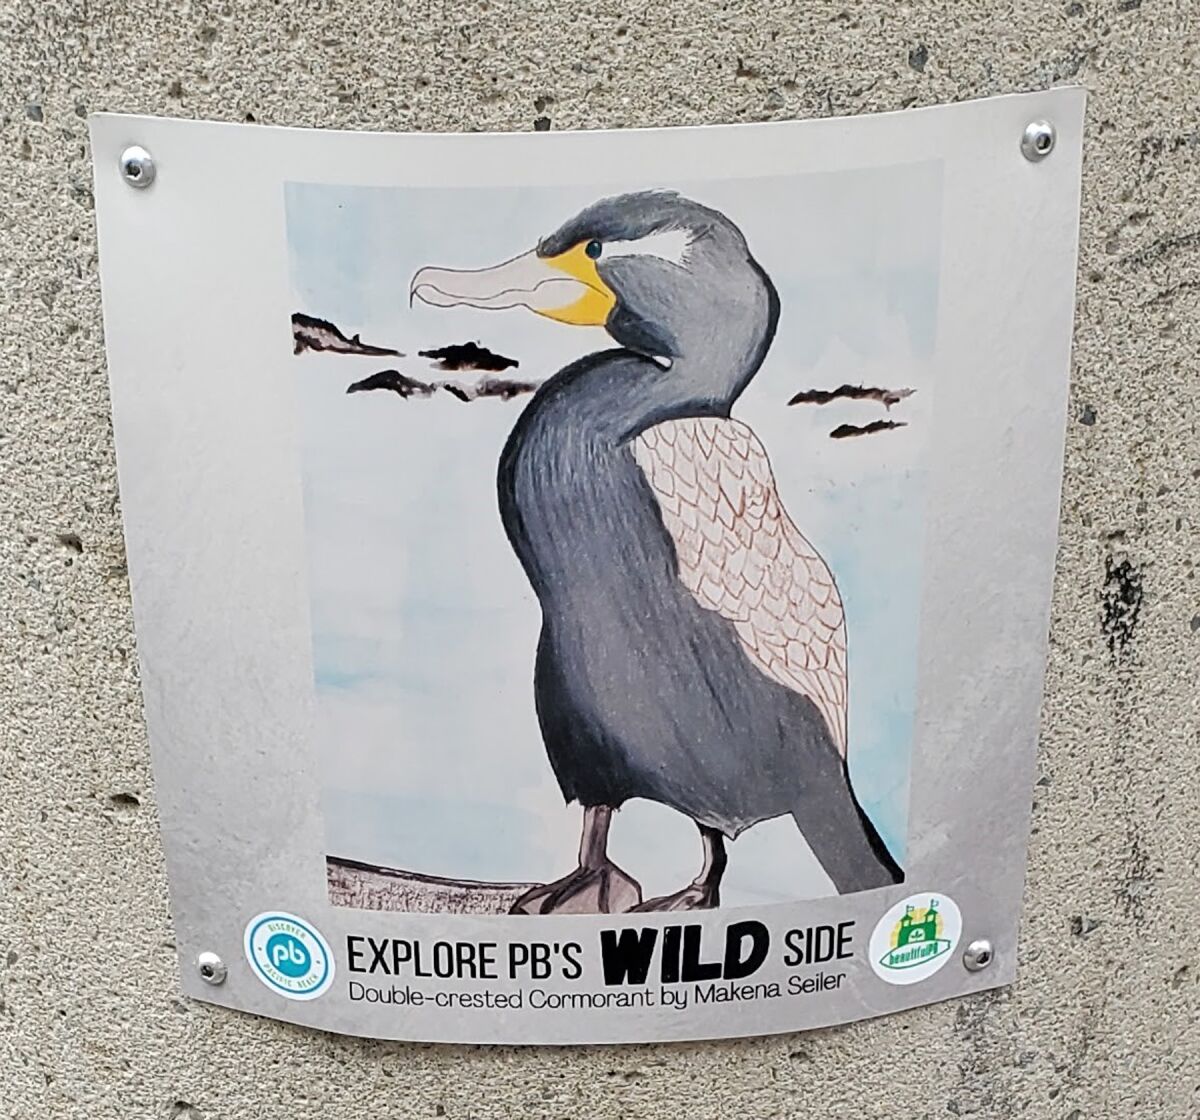 PB Middle School student Makena Seiler designed the Double-crested Cormorant that adorns a trash can in the community.